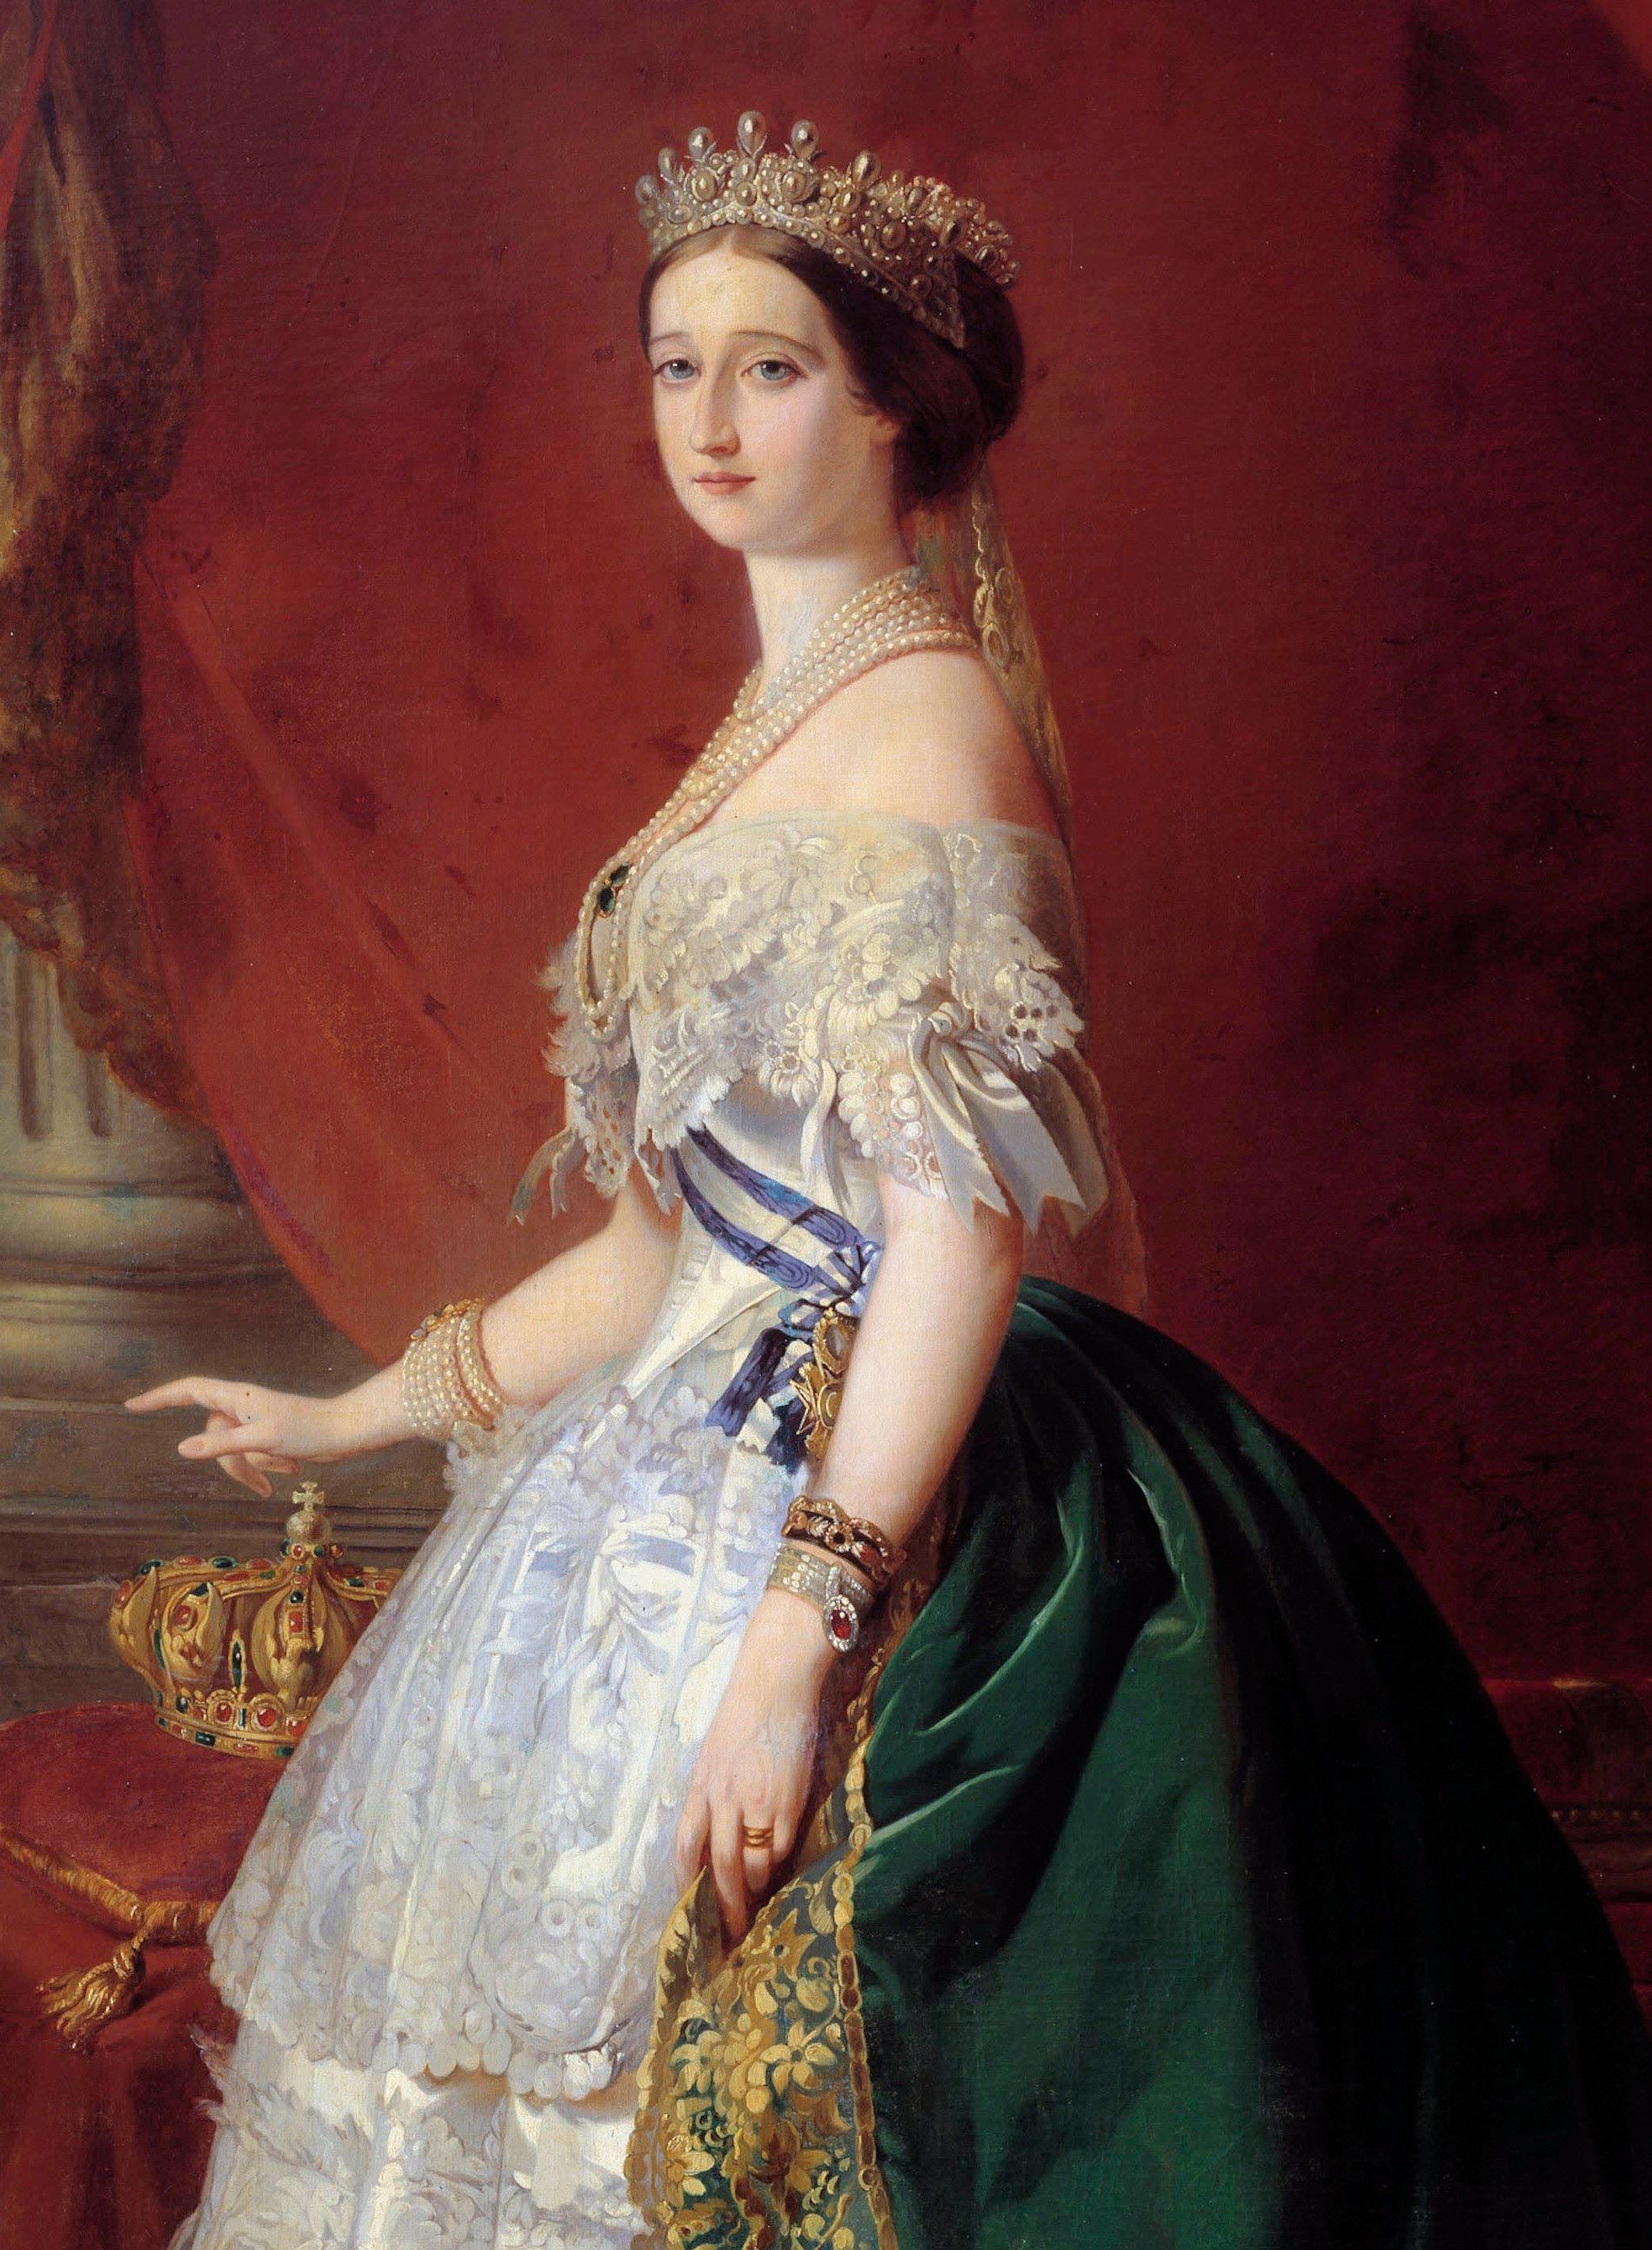 France's Empress Eugénie who shared Queen Victoria's passion for pearls by Franz Xaver Winterhalter, 1853